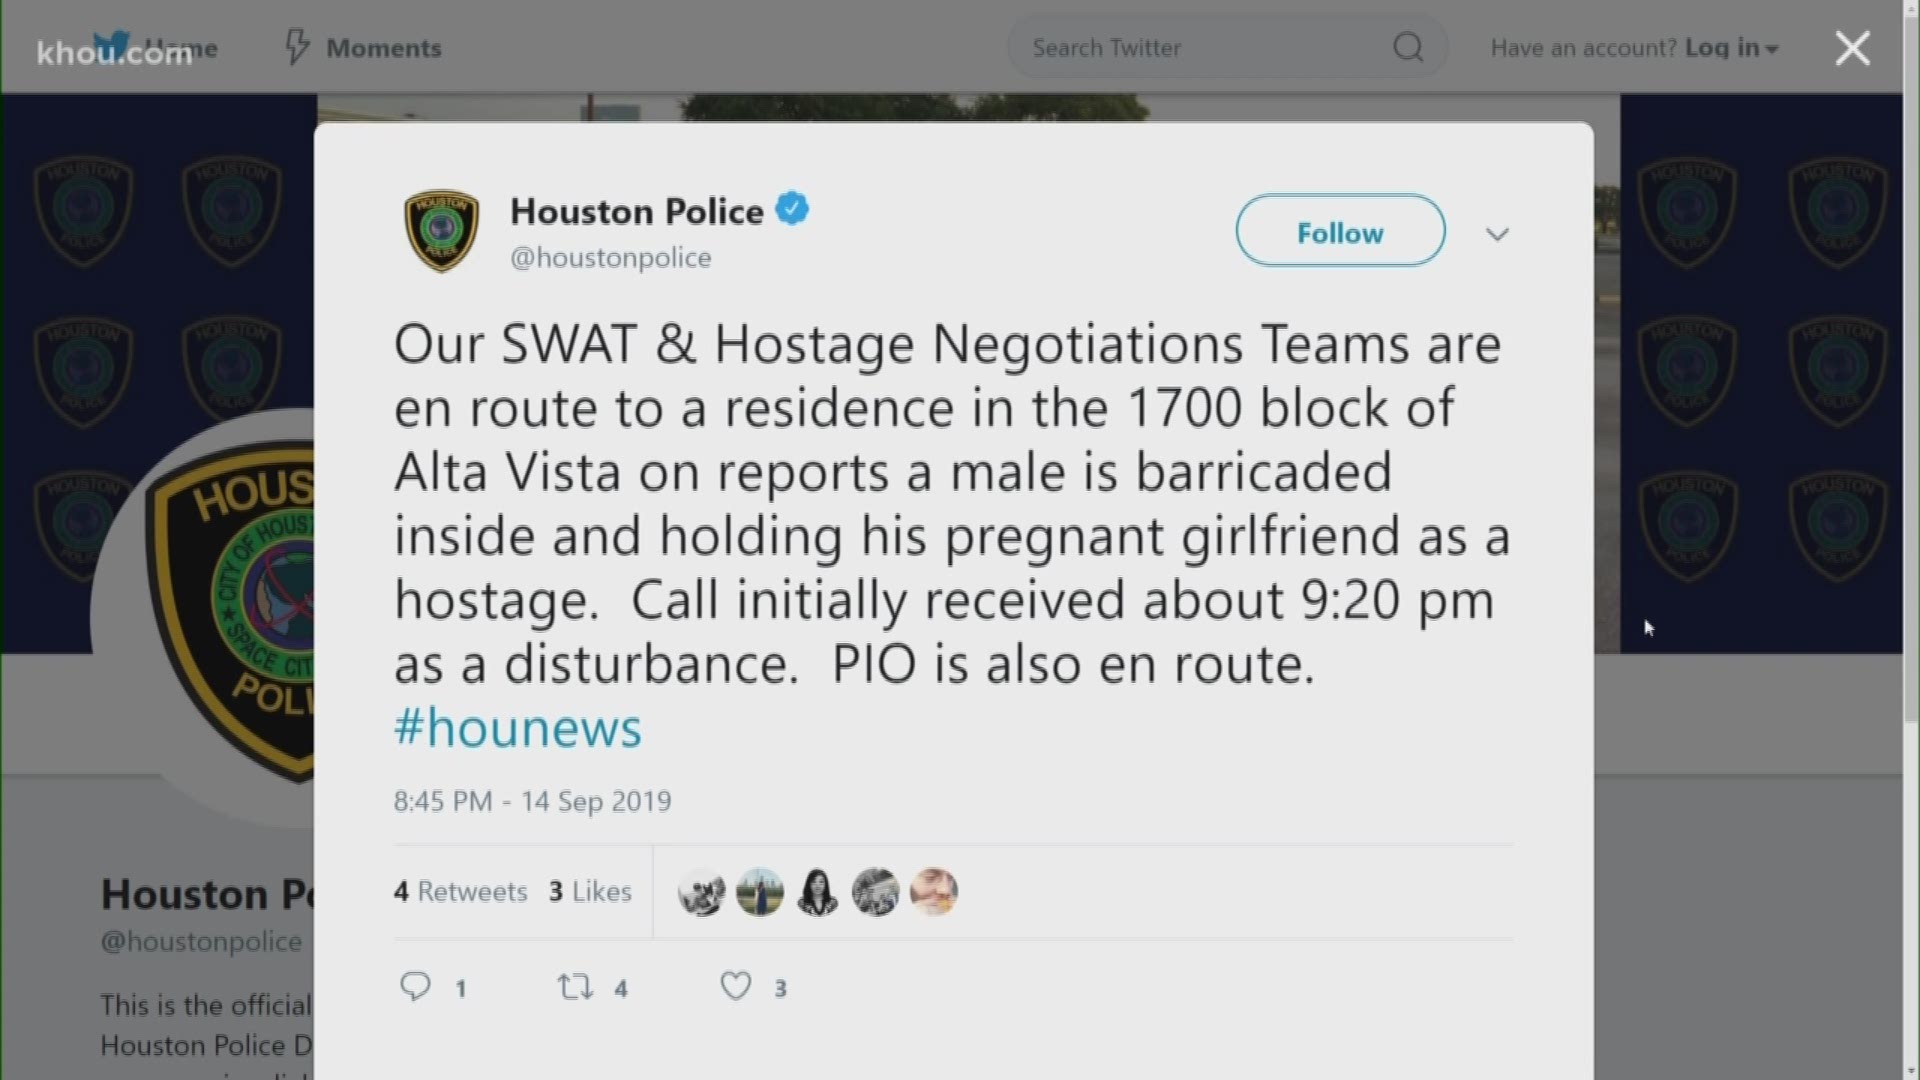 Houston Police's SWAT team is responding to reports of a man barricaded inside his home holding his pregnant girlfriend hostage.